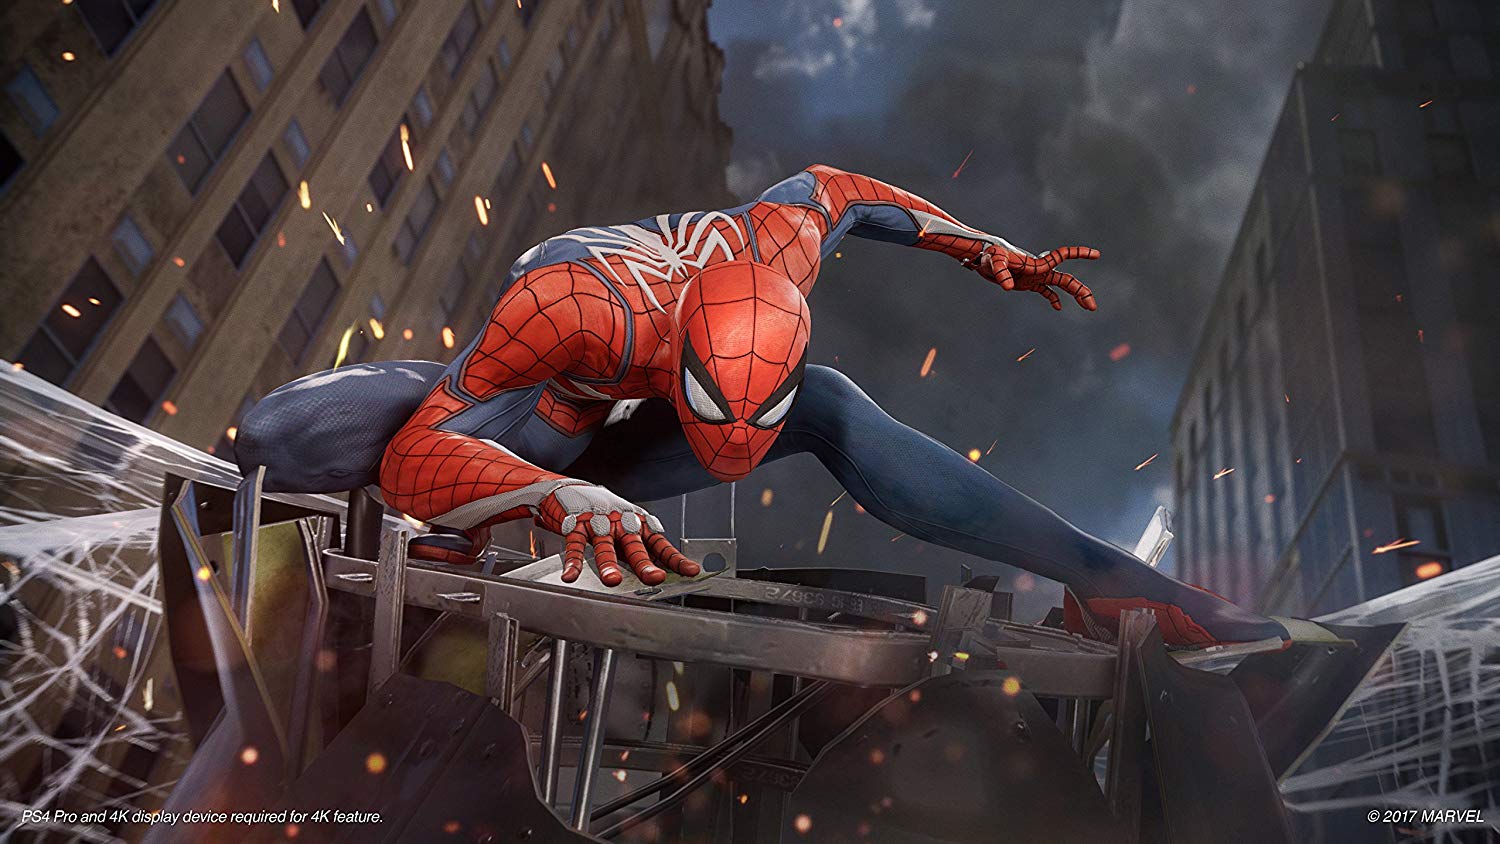 Marvel's Spider-Man Remastered - PC Features Trailer I PC Games 